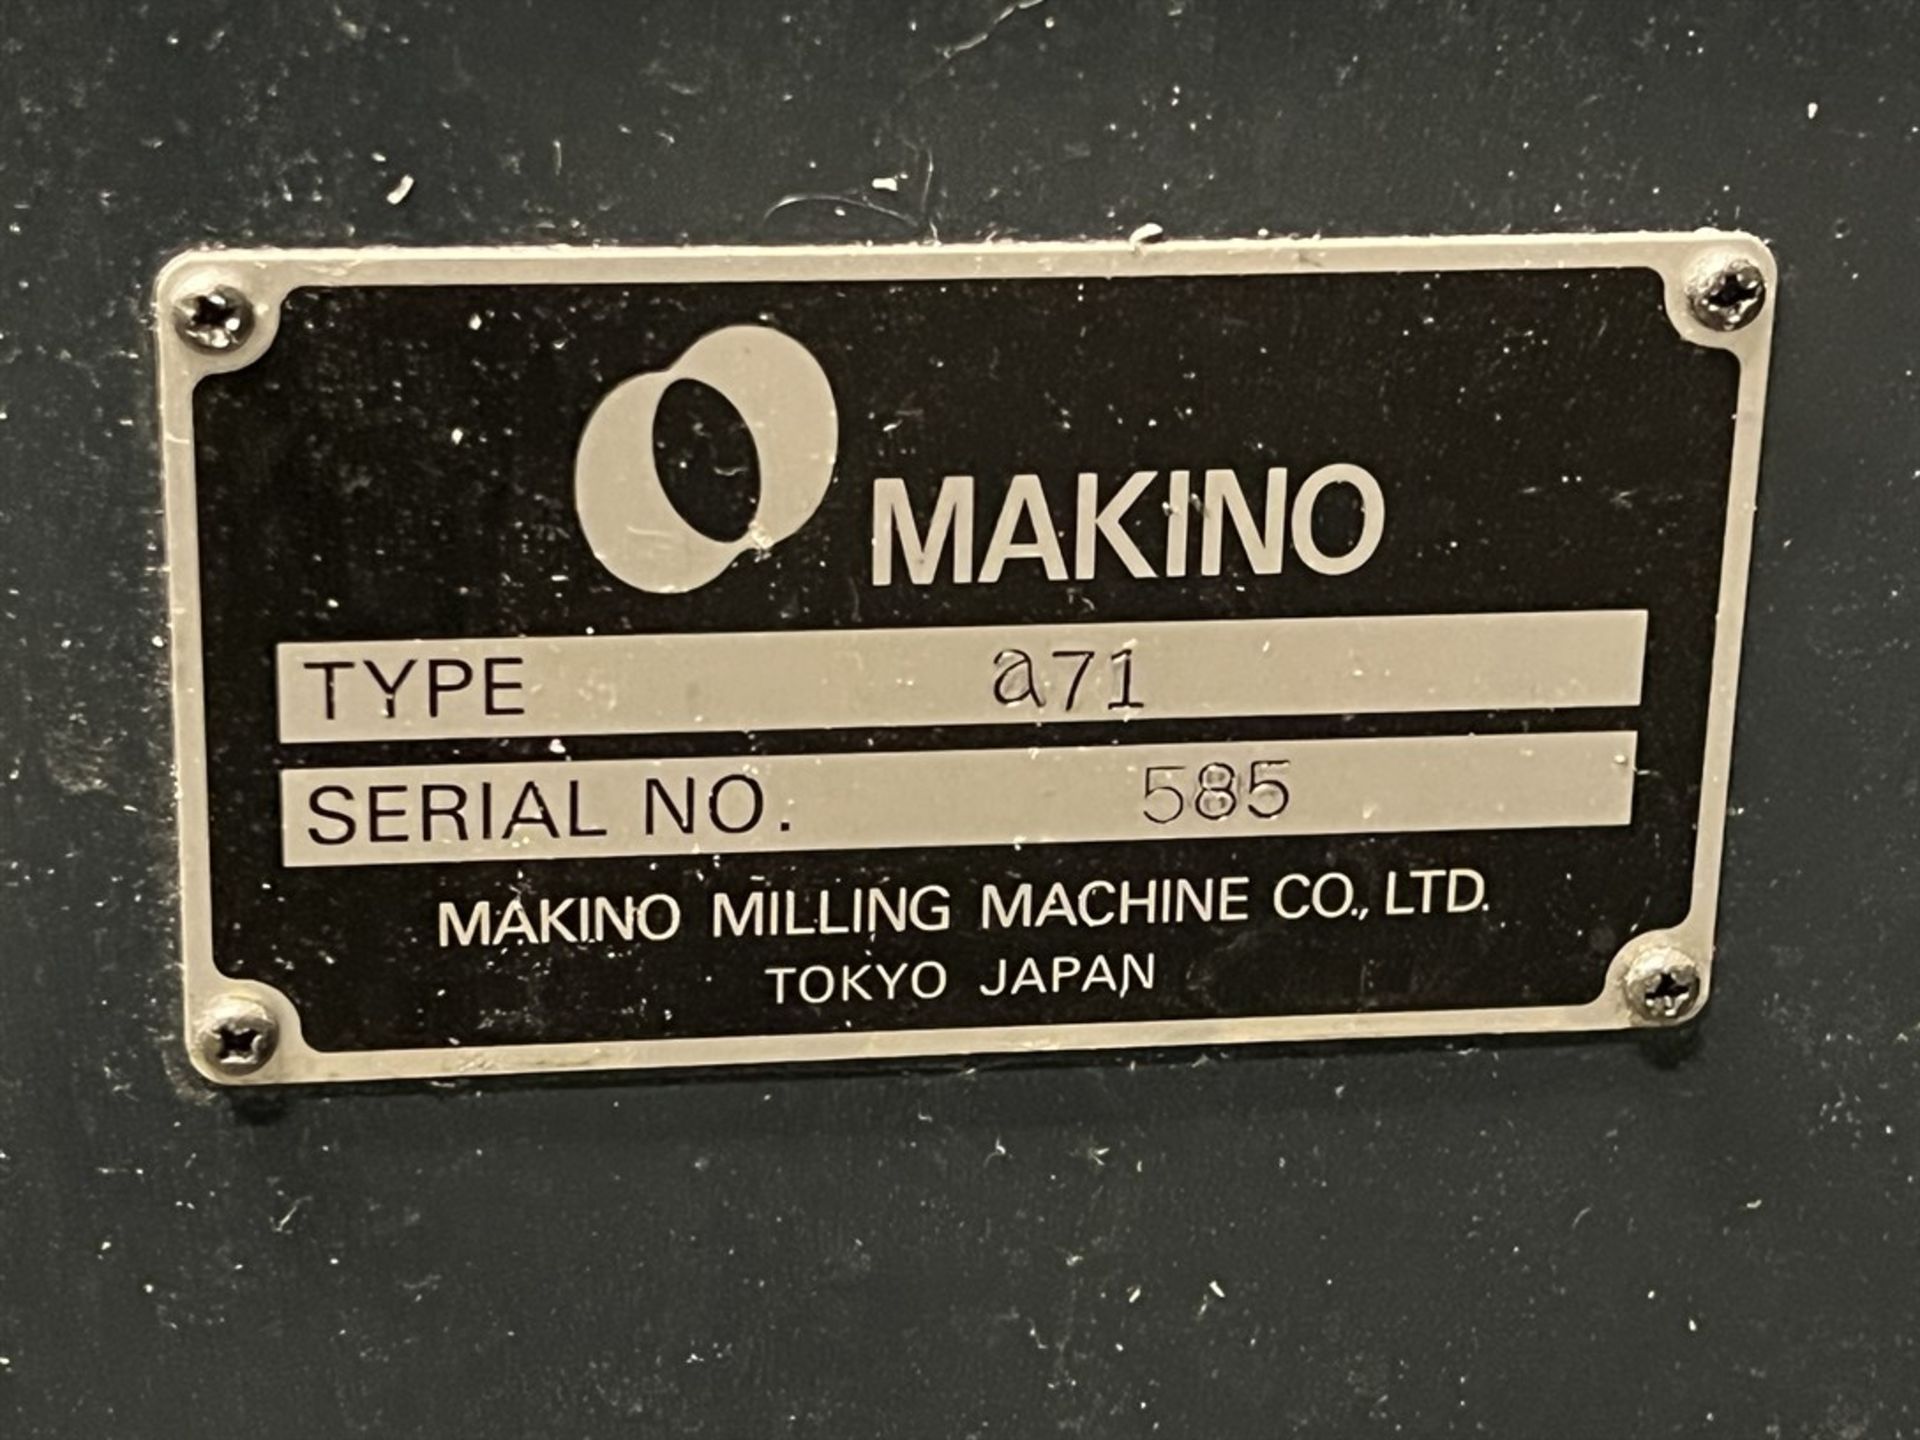 MAKINO a71 4-Axis Horizontal Machining Center, s/n 585, w/ PROFFESSIONAL 5 Control, 28.7”X, 28.7”Y, - Image 13 of 13